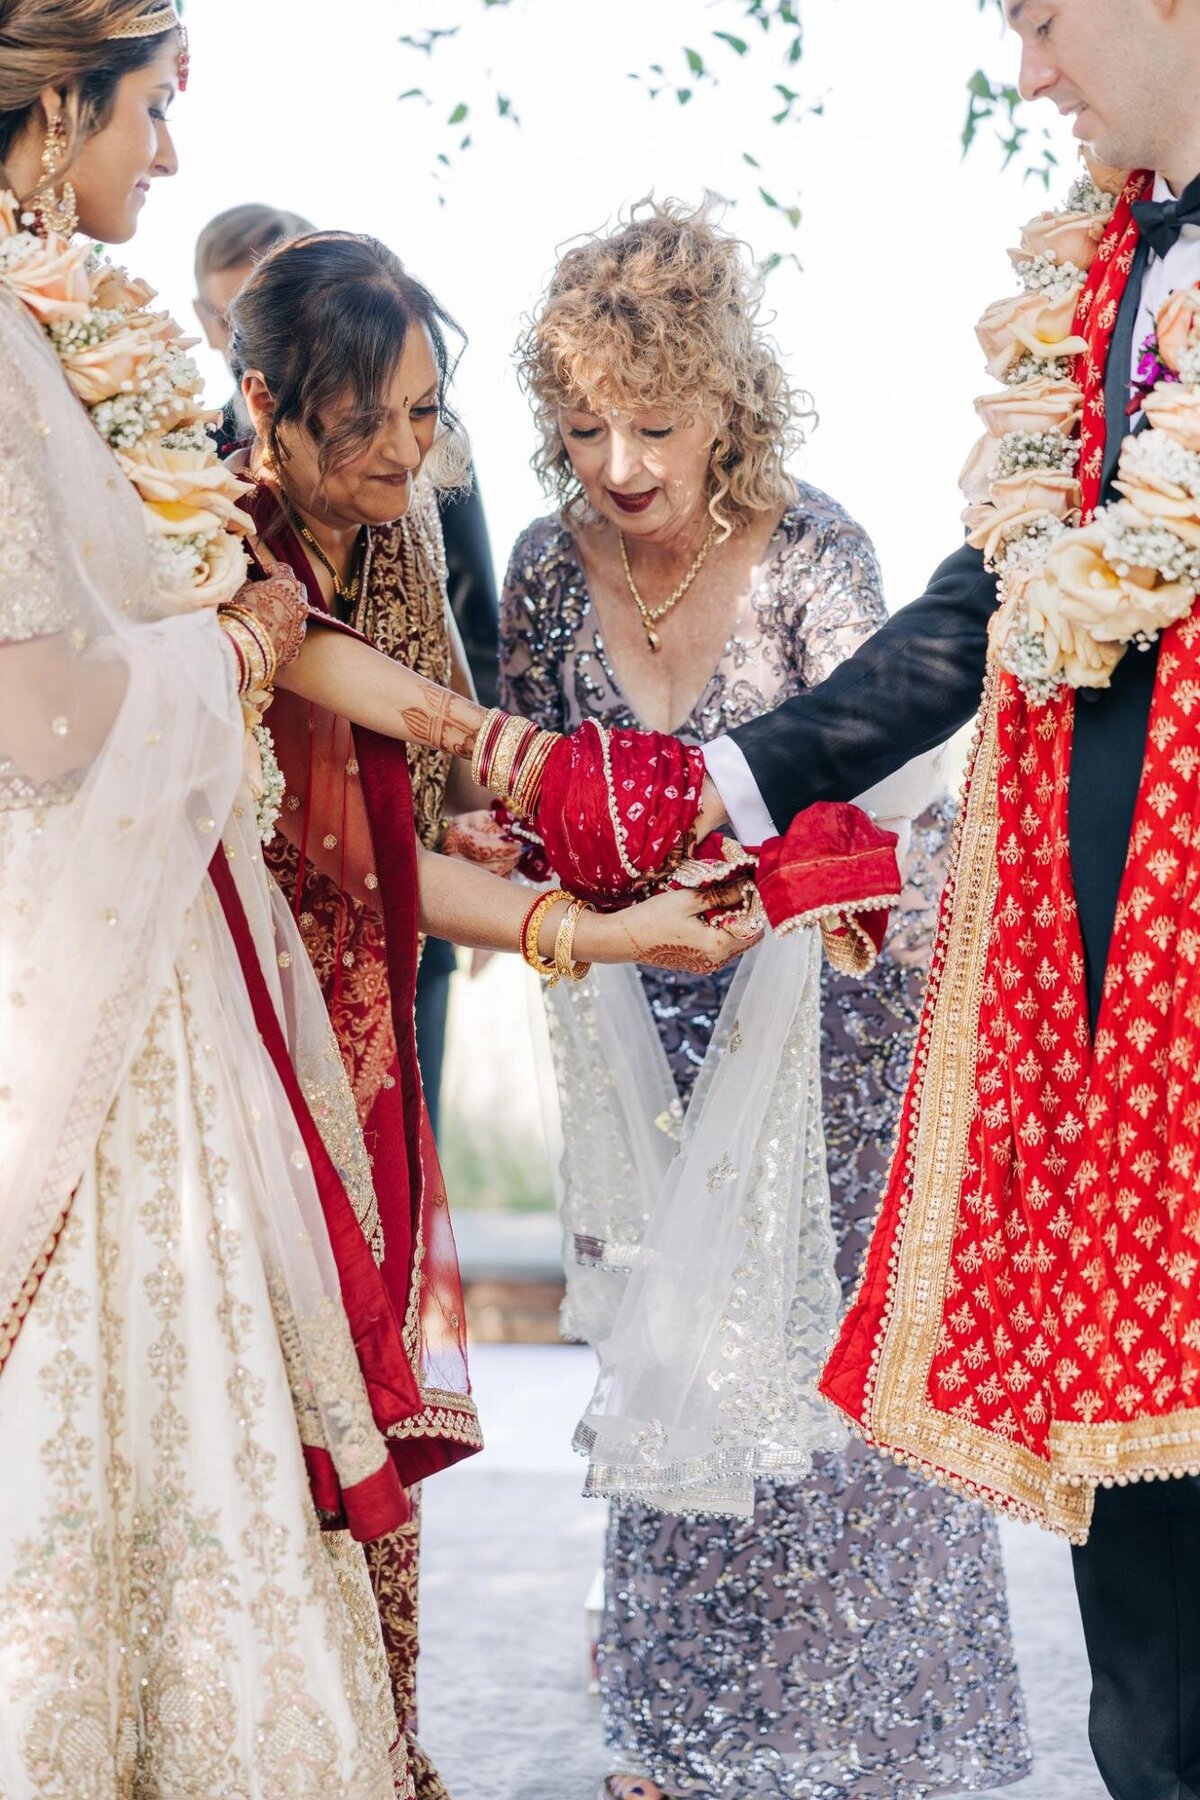 A multicultural wedding ceremony with a bride in a red and white sari receiving blessings from an older woman in a silver dress.